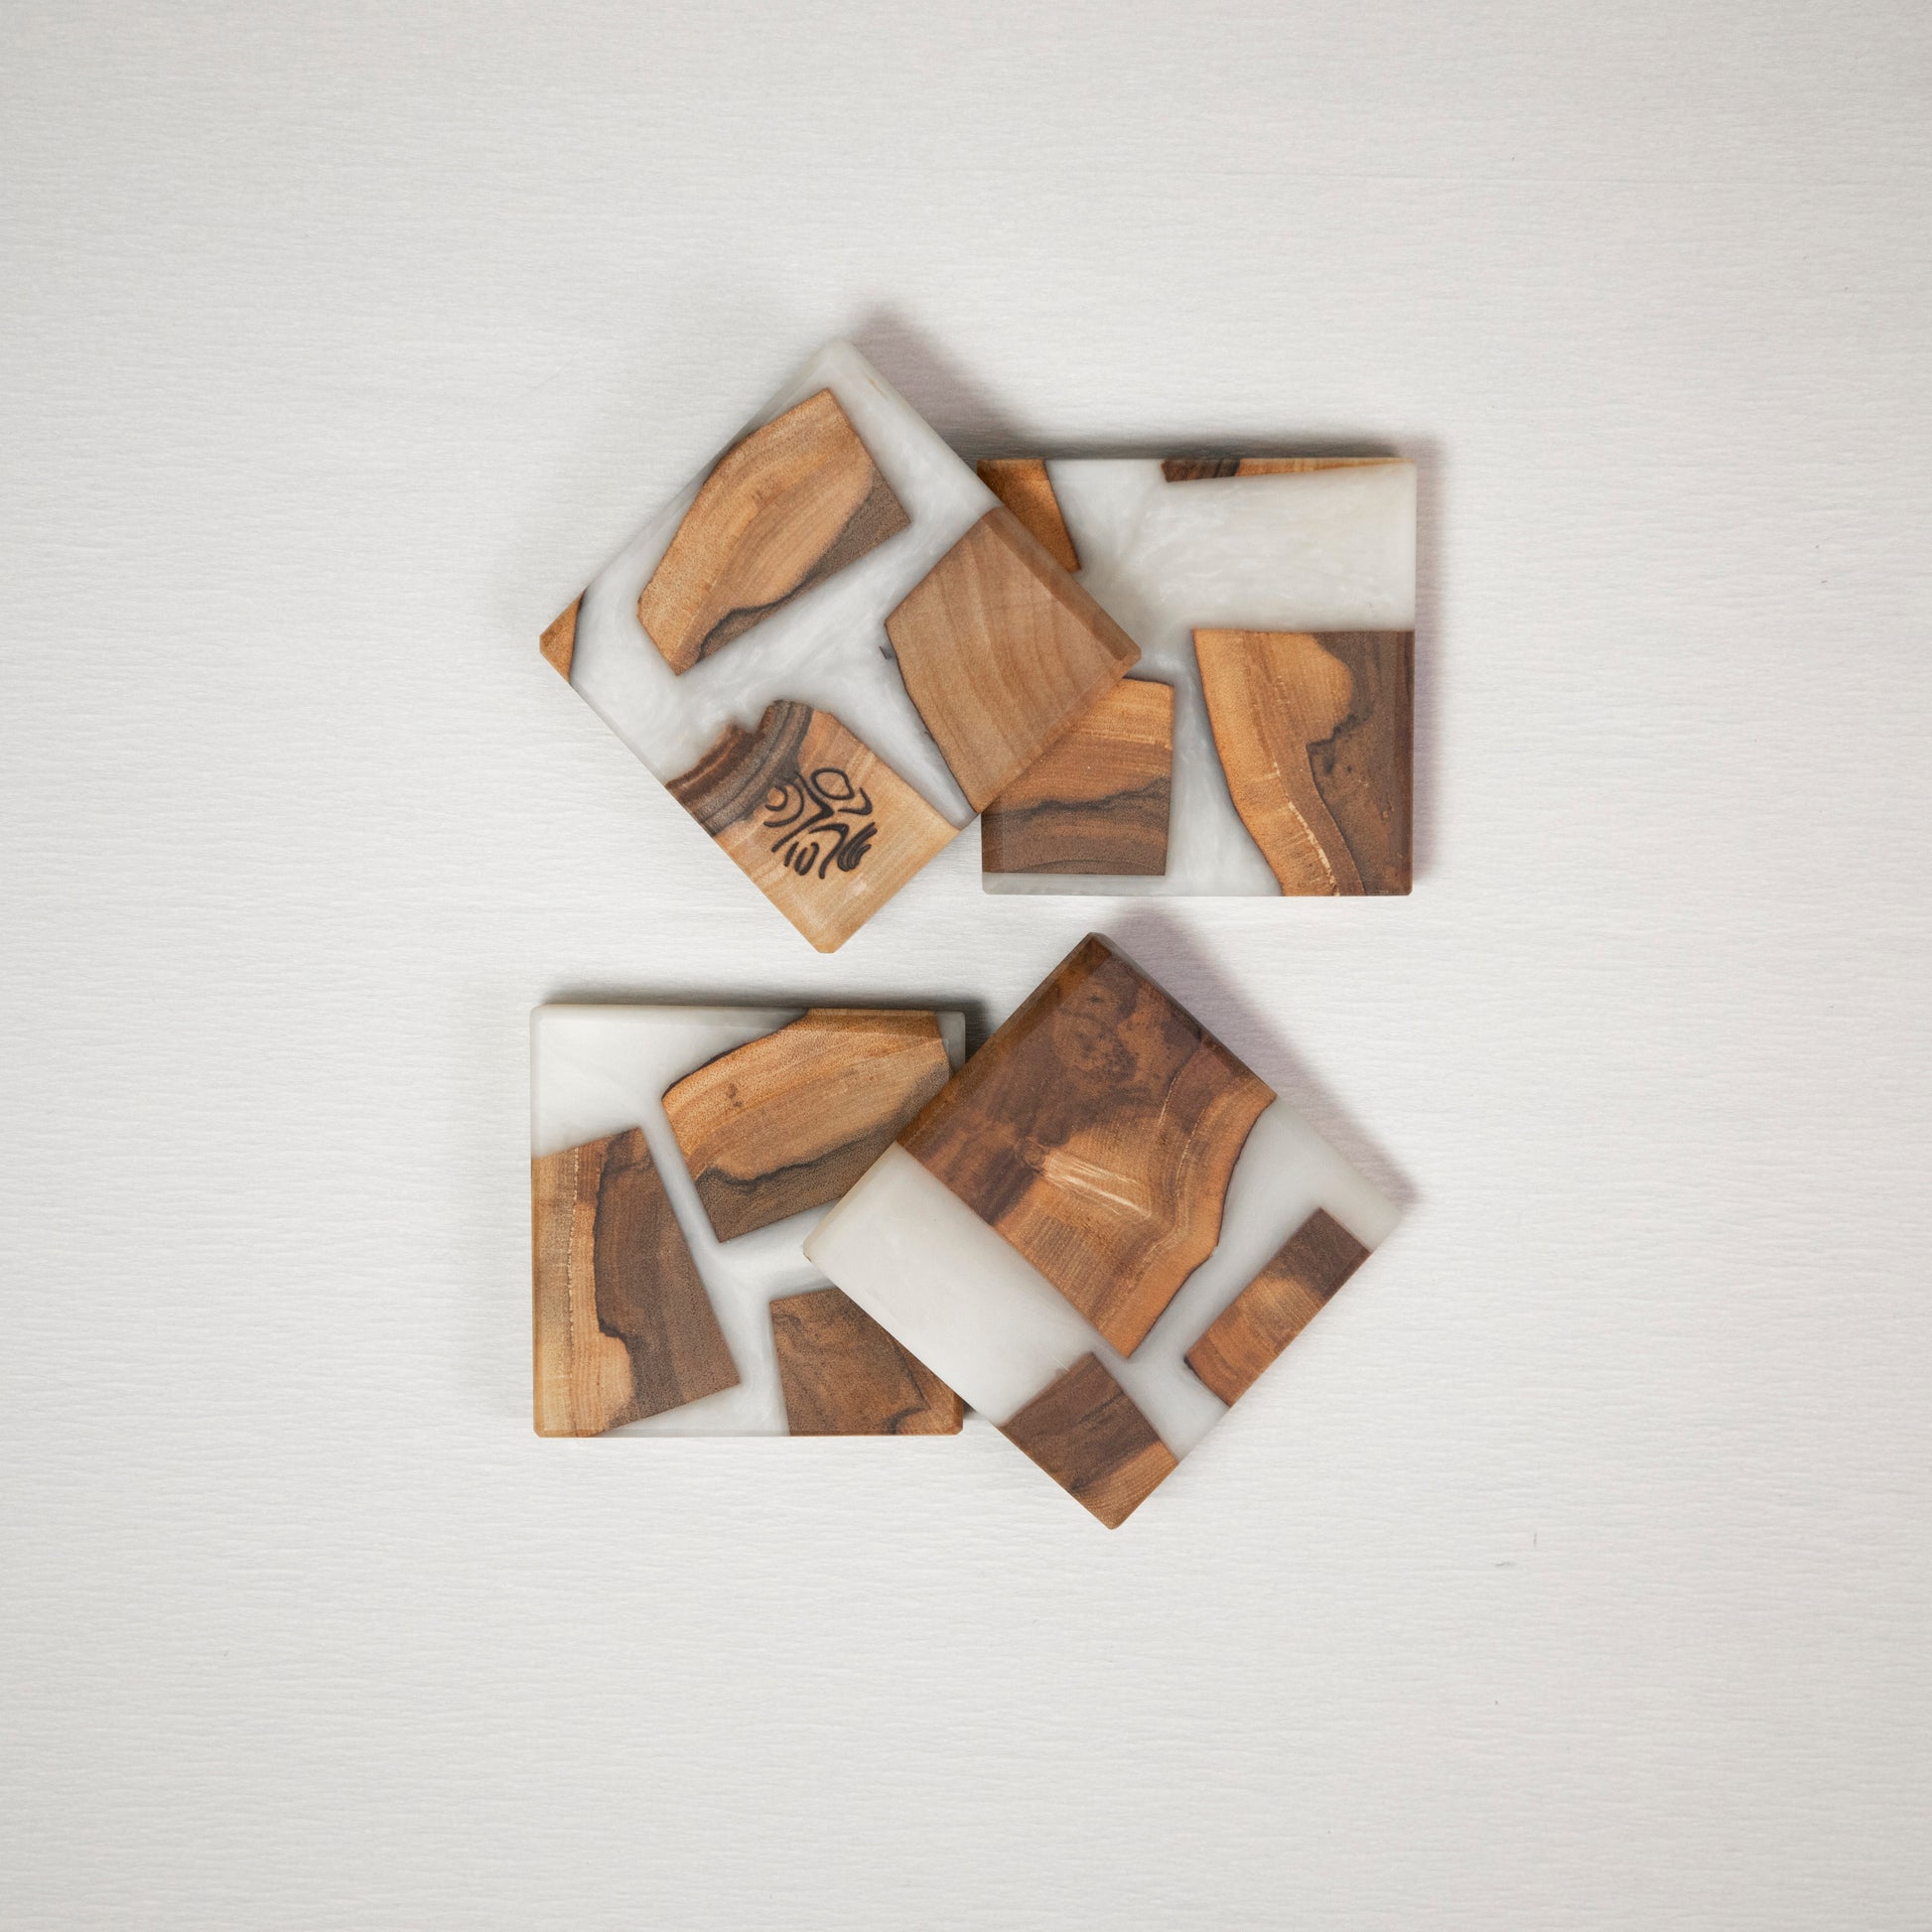 Four coasters made from wood and epoxy resin in the color nobel white